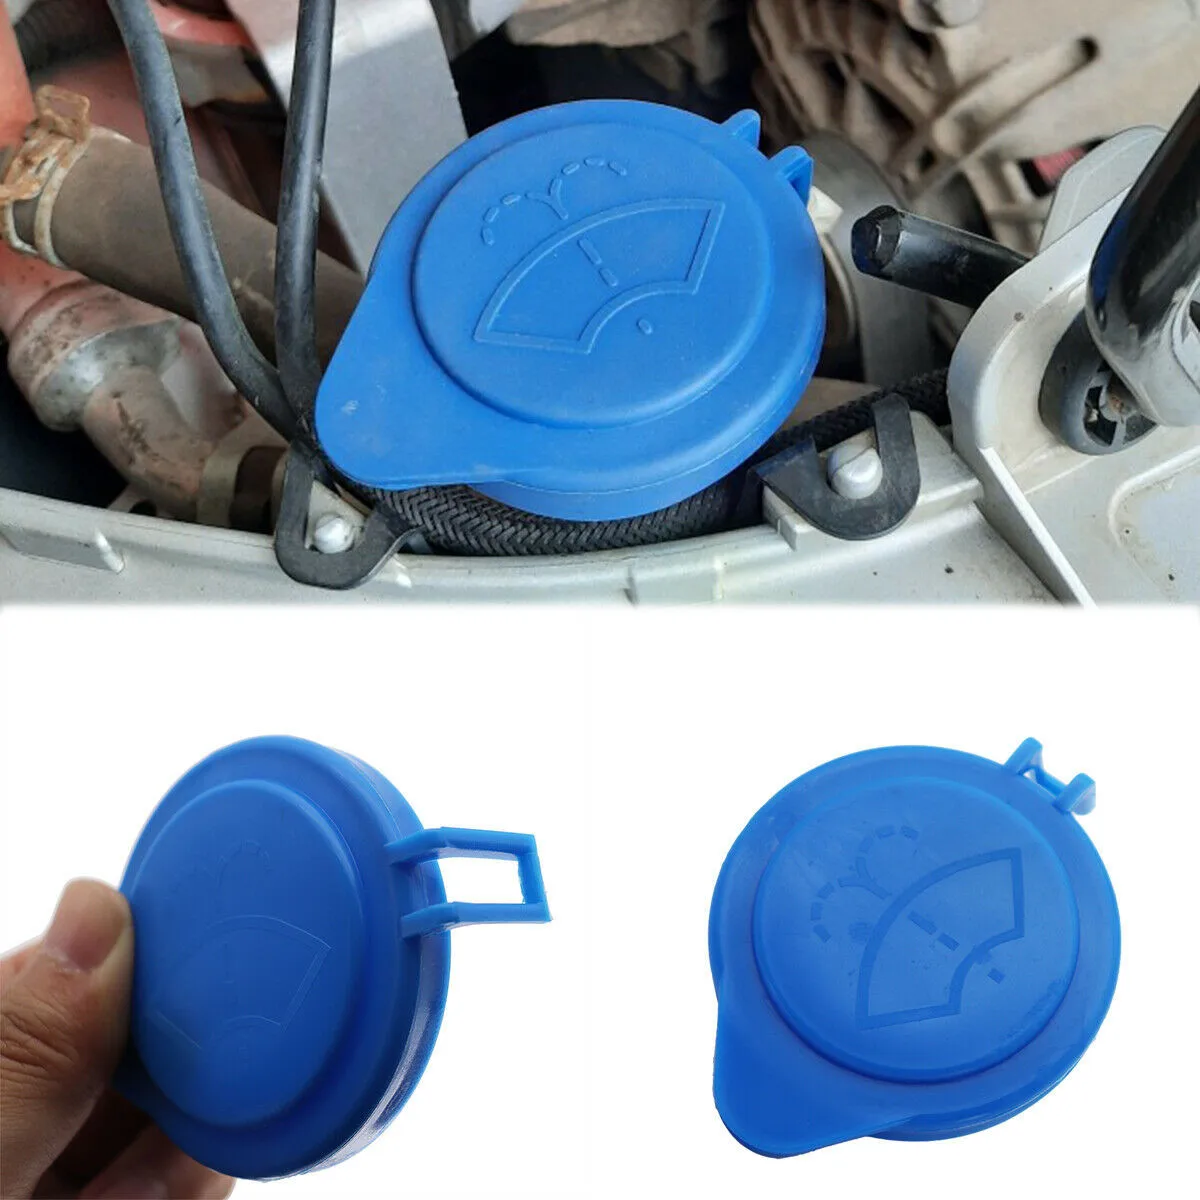 

Car Windshield Wiper Washer Fluid Reservoir Bottle Cap Cover For Ford Focus 11-15 1708196, 54009, CP9Z17A605A, KT1Z17632A